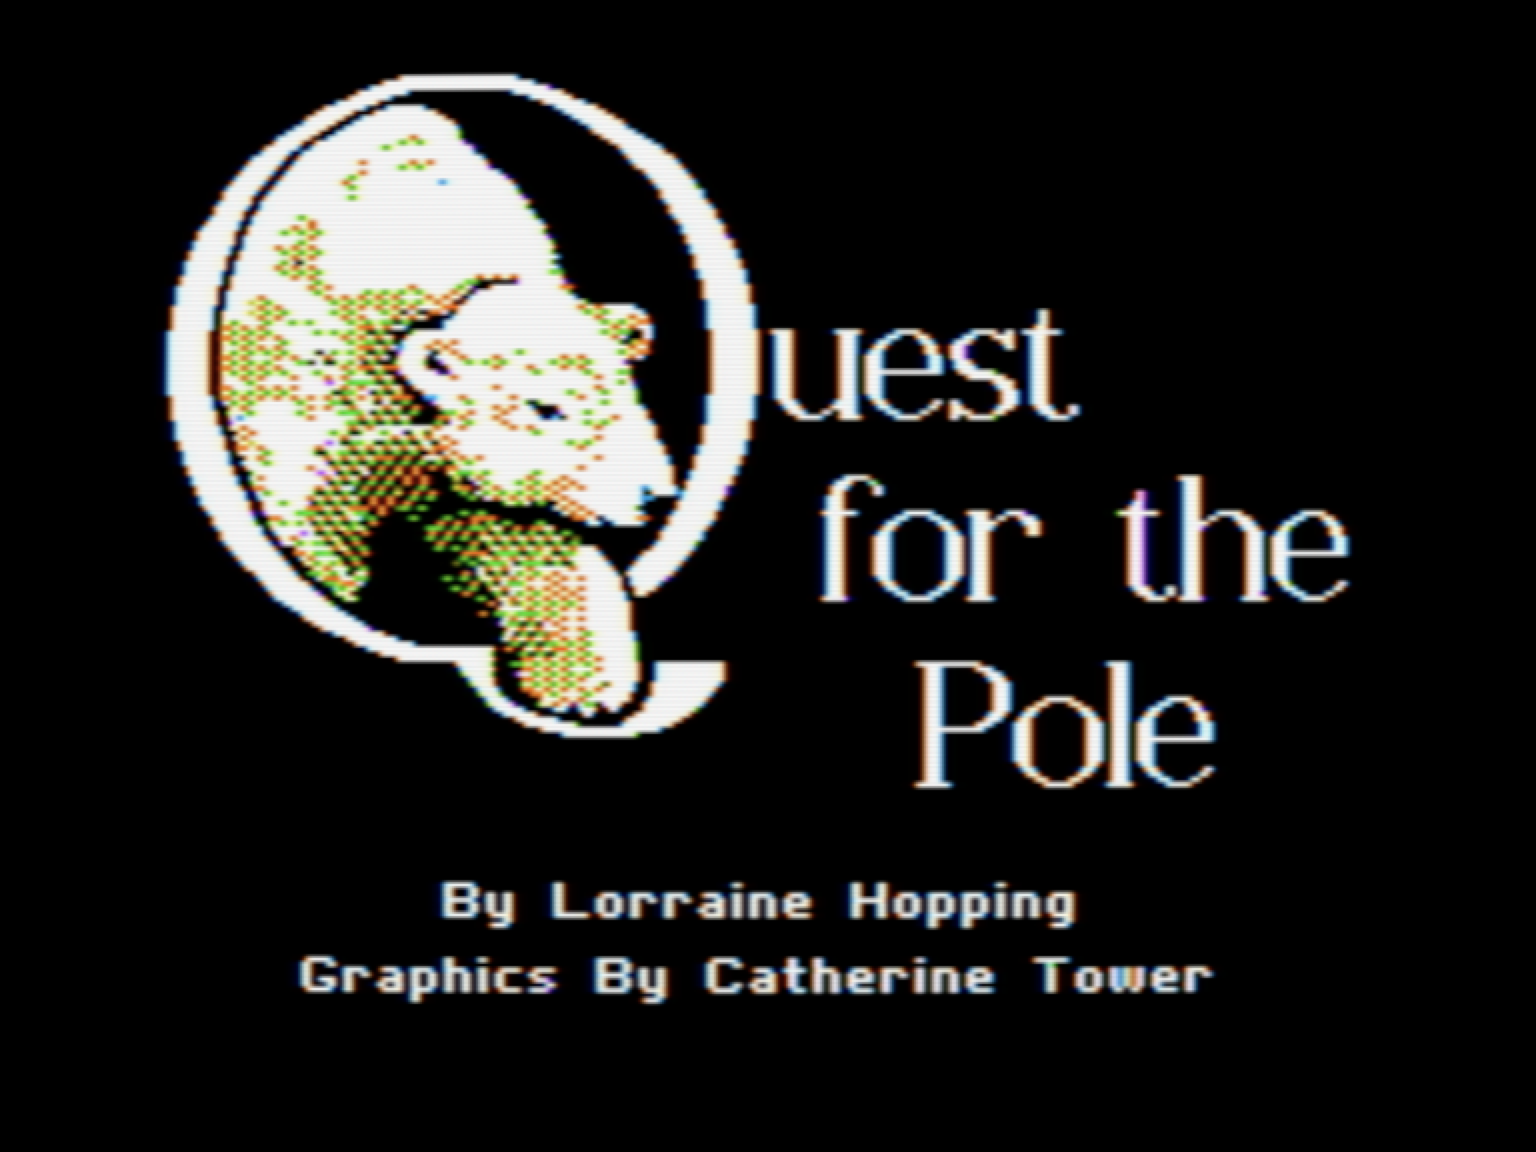 title screenshot from "Quest for the Pole" with polar bear inside the giant letter Q